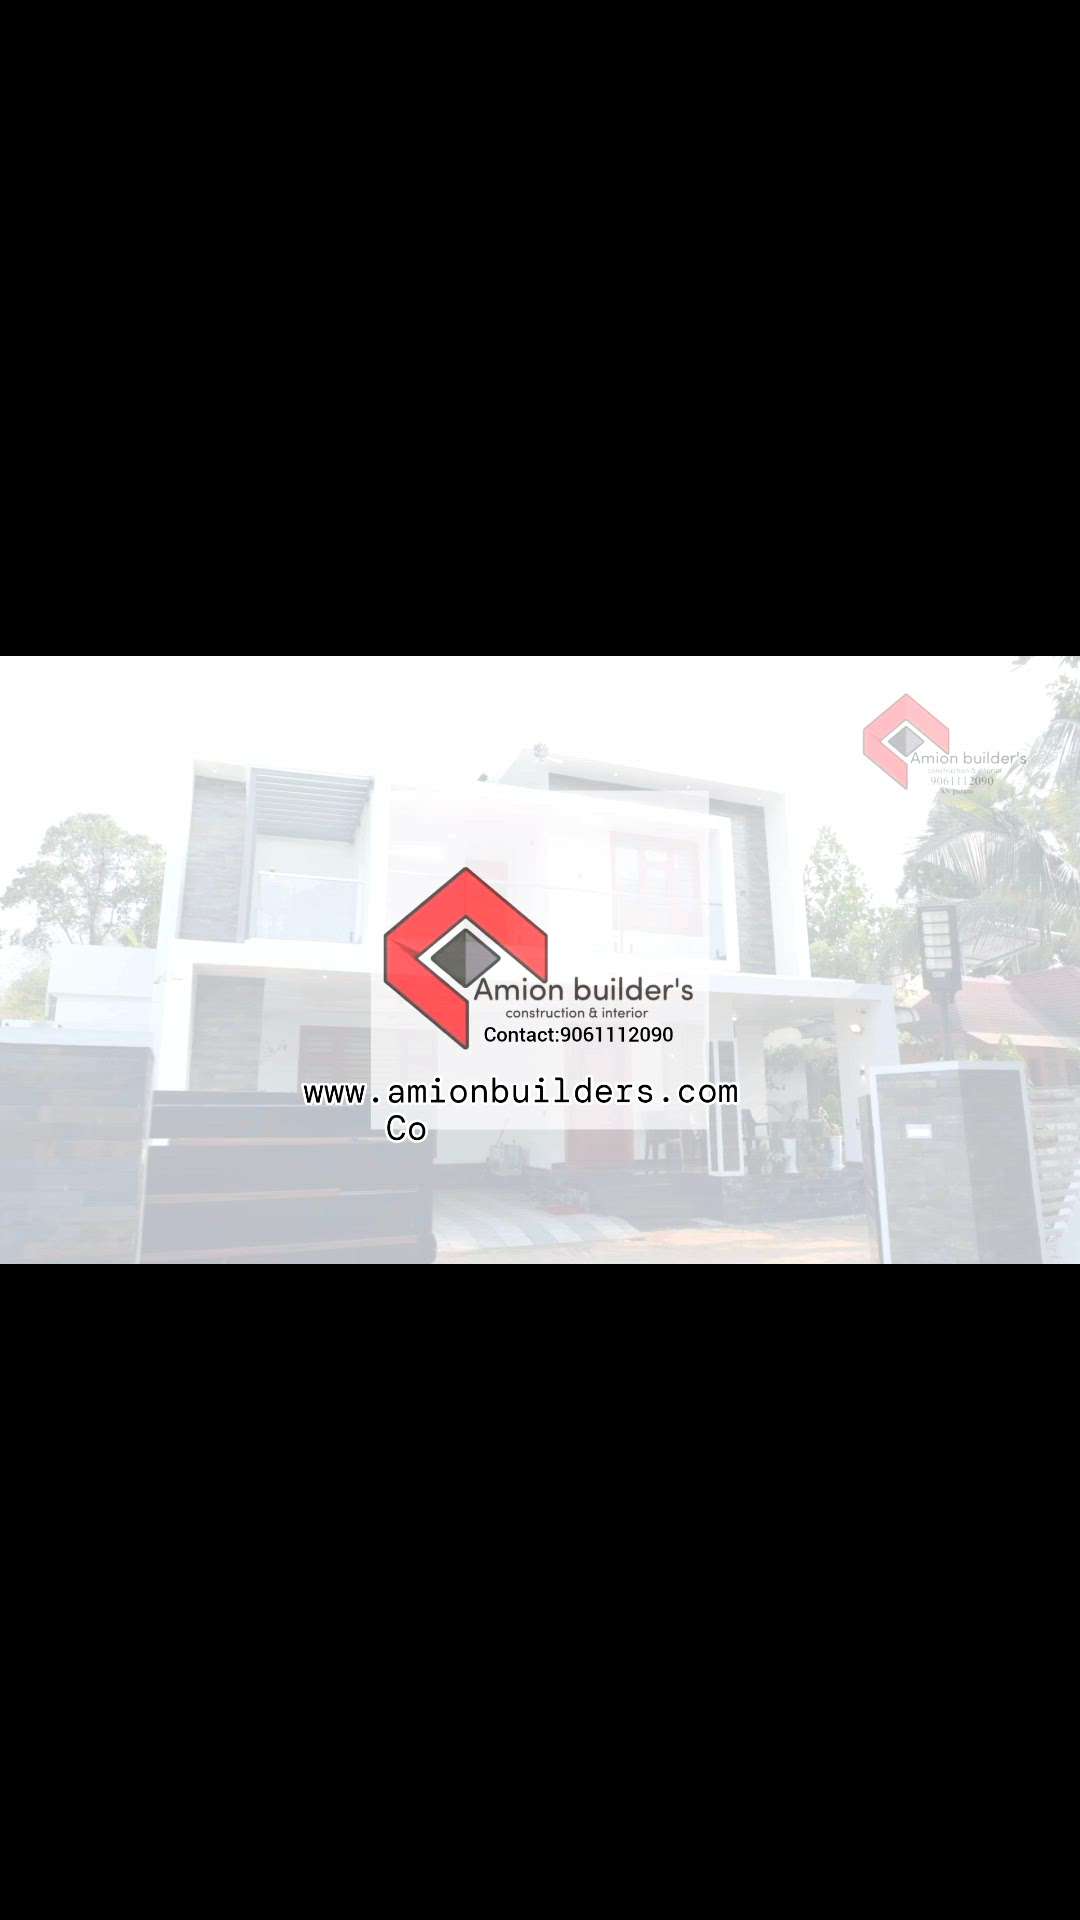 "Amionbuilder's"
constructions& Interiors 

Completed New project construction and interior full work,, Reasonable price . Good quality meterials.. more details please contact: 9061112090